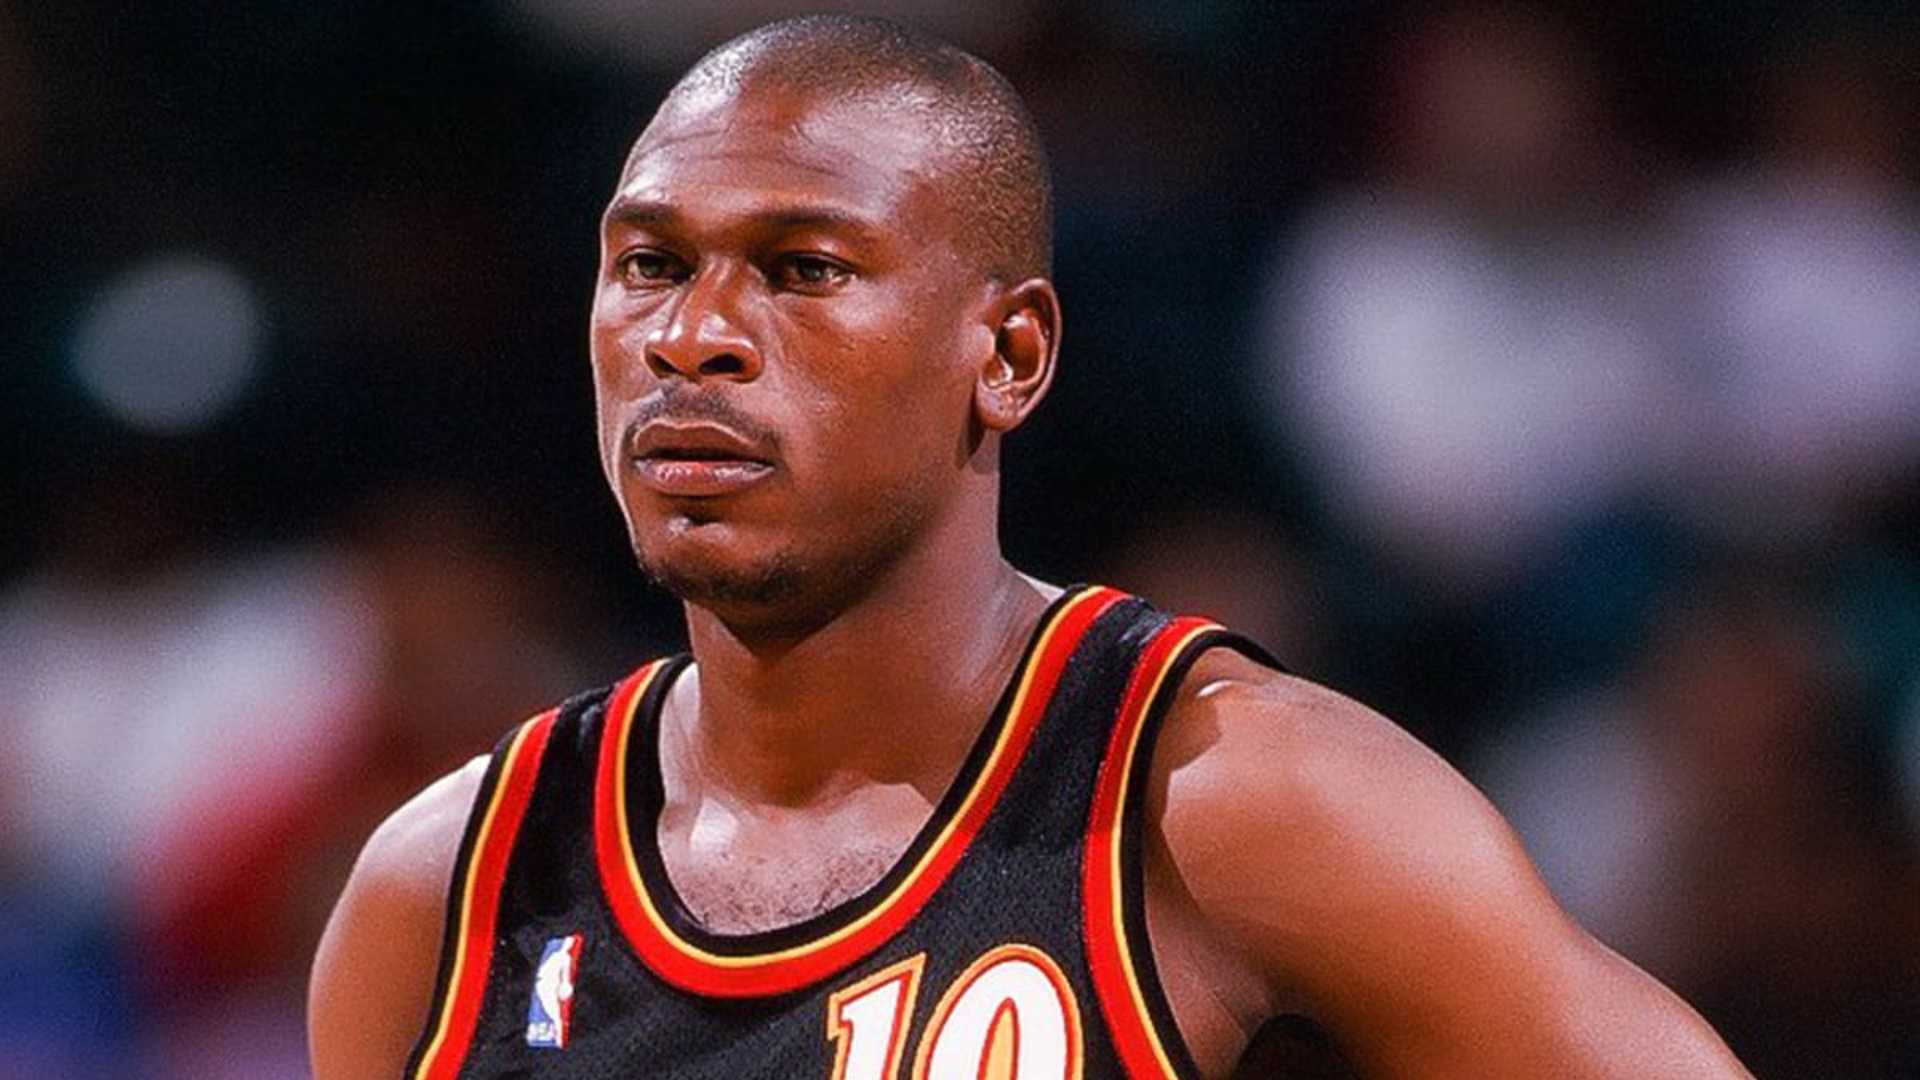 Mookie Blaylock in a file photo. (Image credits: twitter)